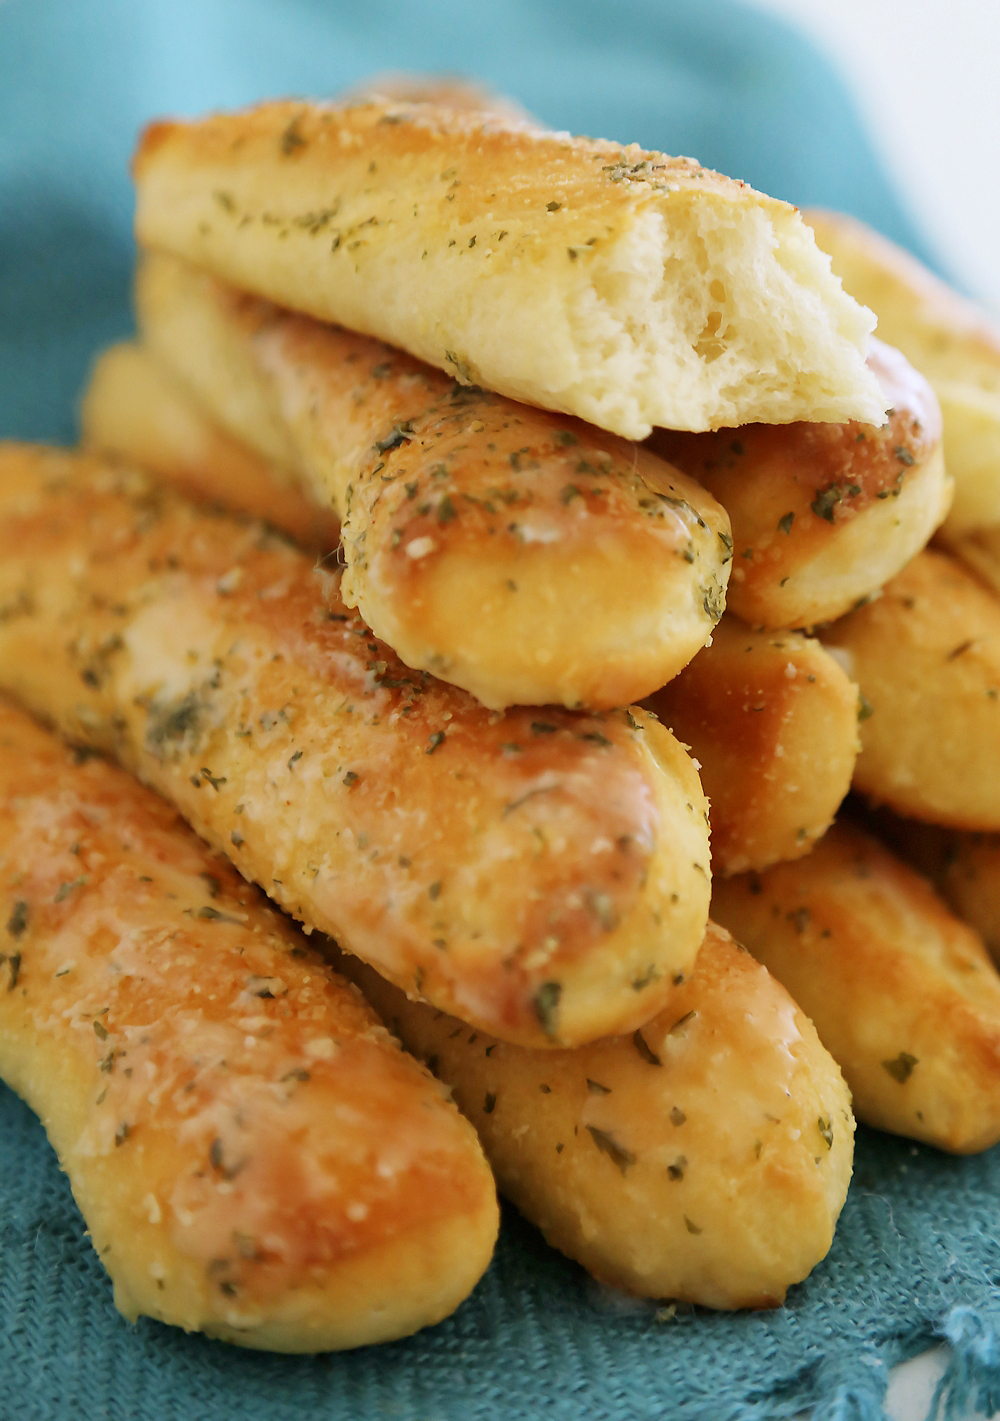 Fluffy Garlic Butter Breadsticks – Super soft, buttery Olive Garden-style breadsticks made easily from scratch! thecomfortofcooking.com